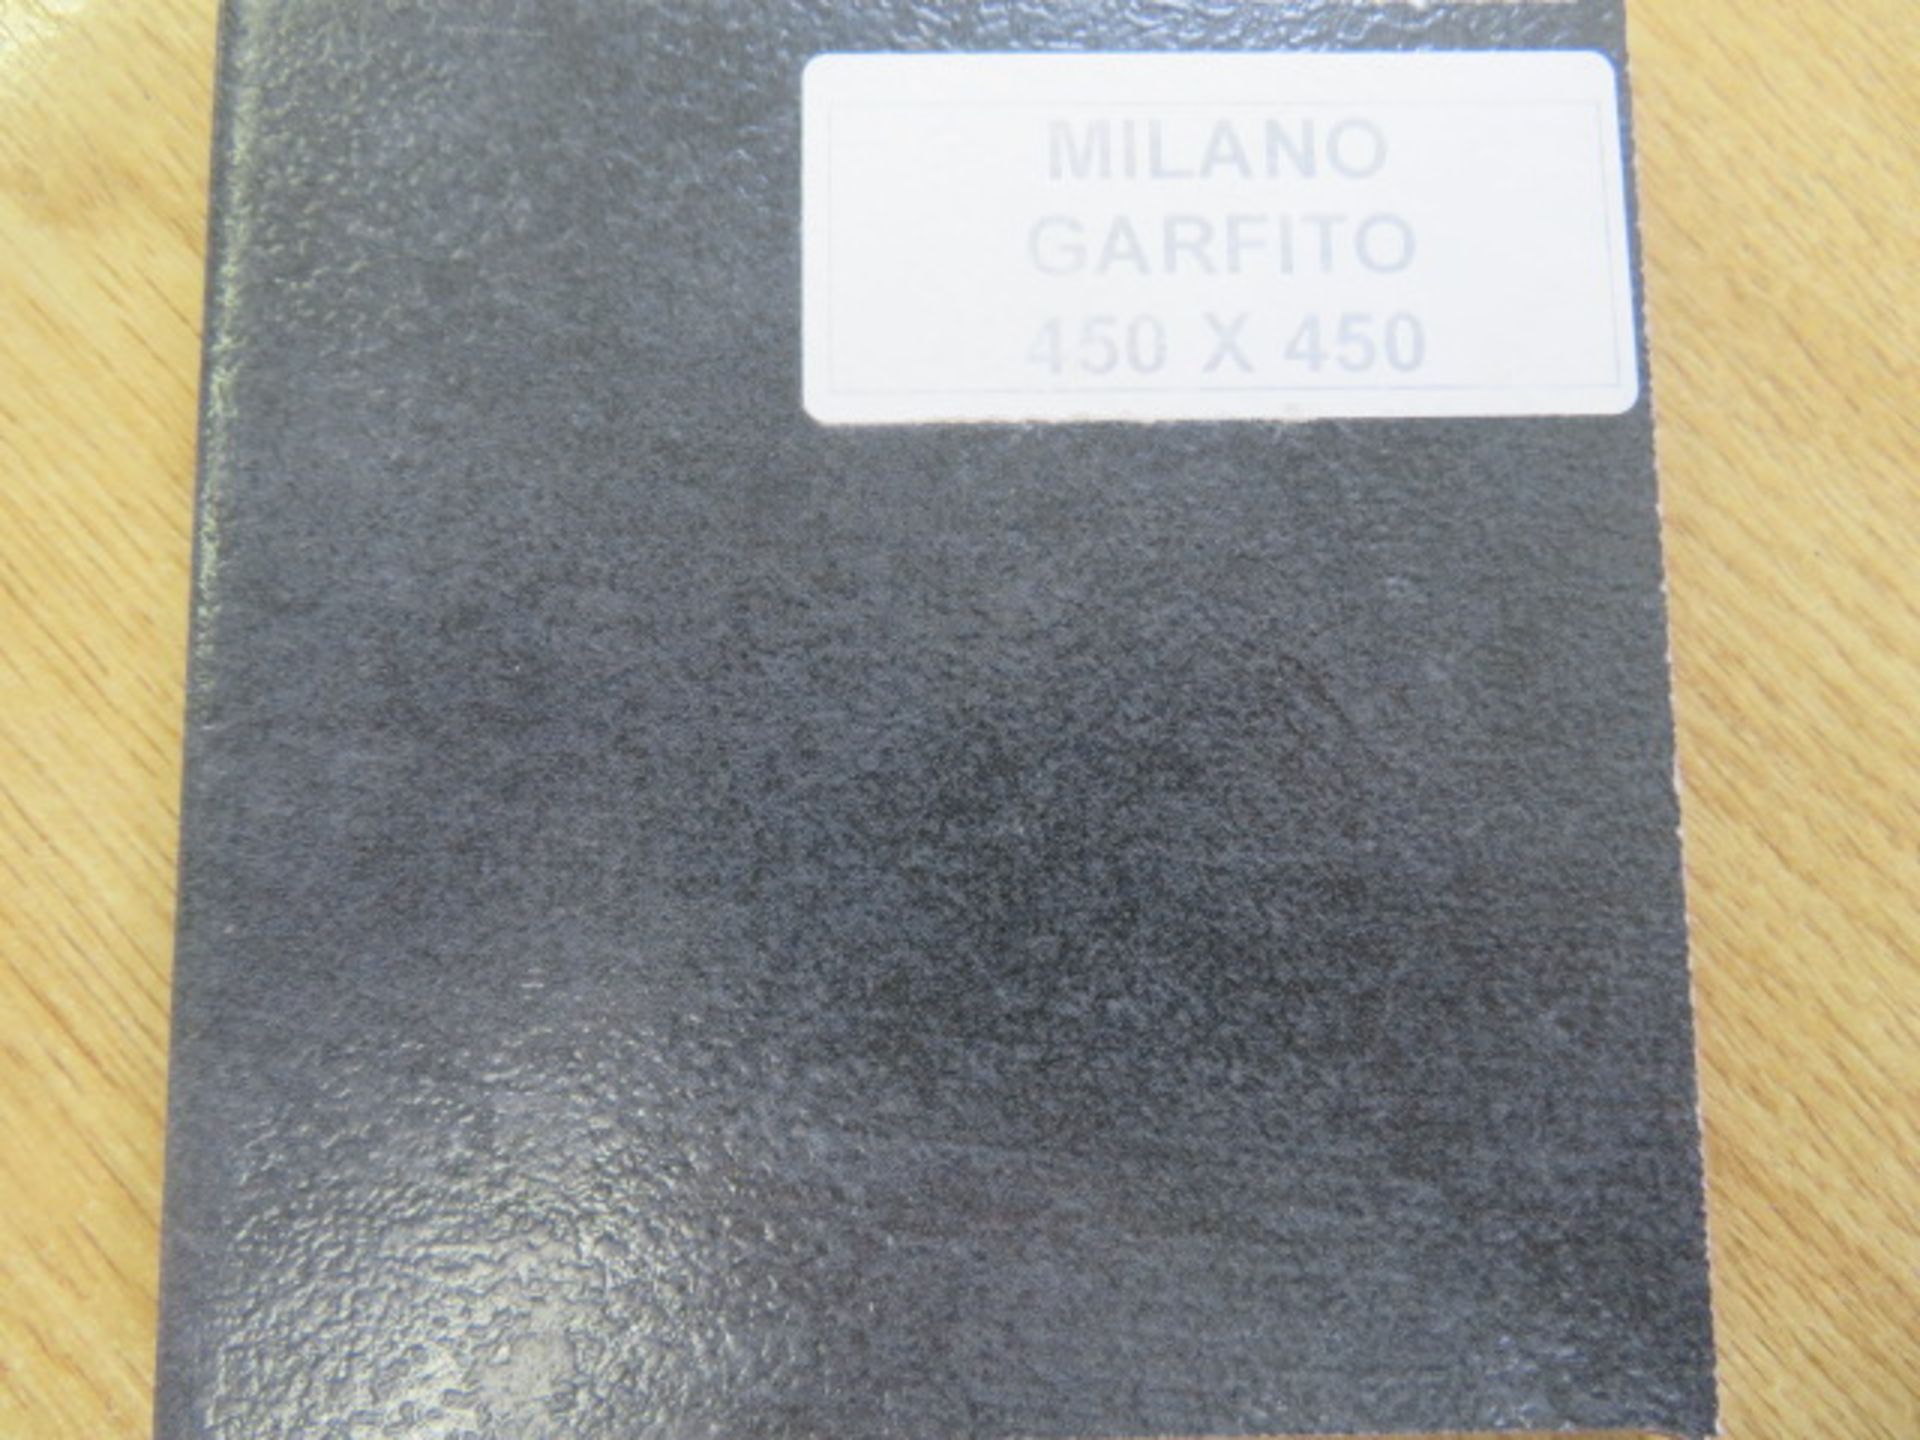 NEW 8.25m2 Milano Garfito Wall and Floor Tiles. 450x450mm per tile, 10mm Thick. Give your bat... - Image 4 of 4